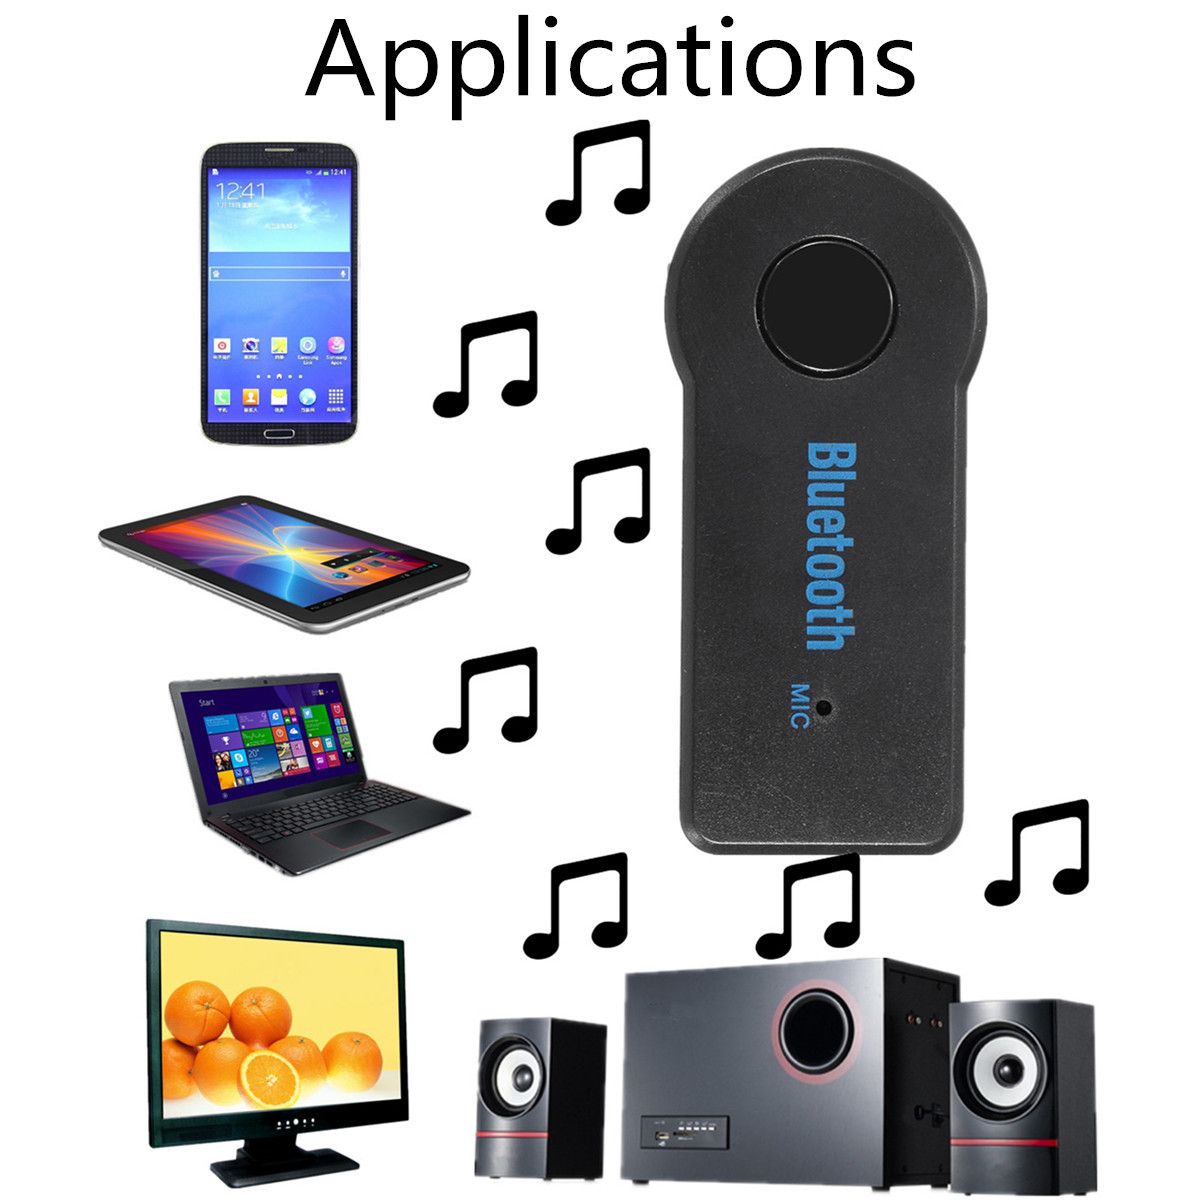 35mm-AUX-Wireless-30-bluetooth-Audio-Music-Receiver-Adapter-Stereo-for-Mobile-Phone-1106388